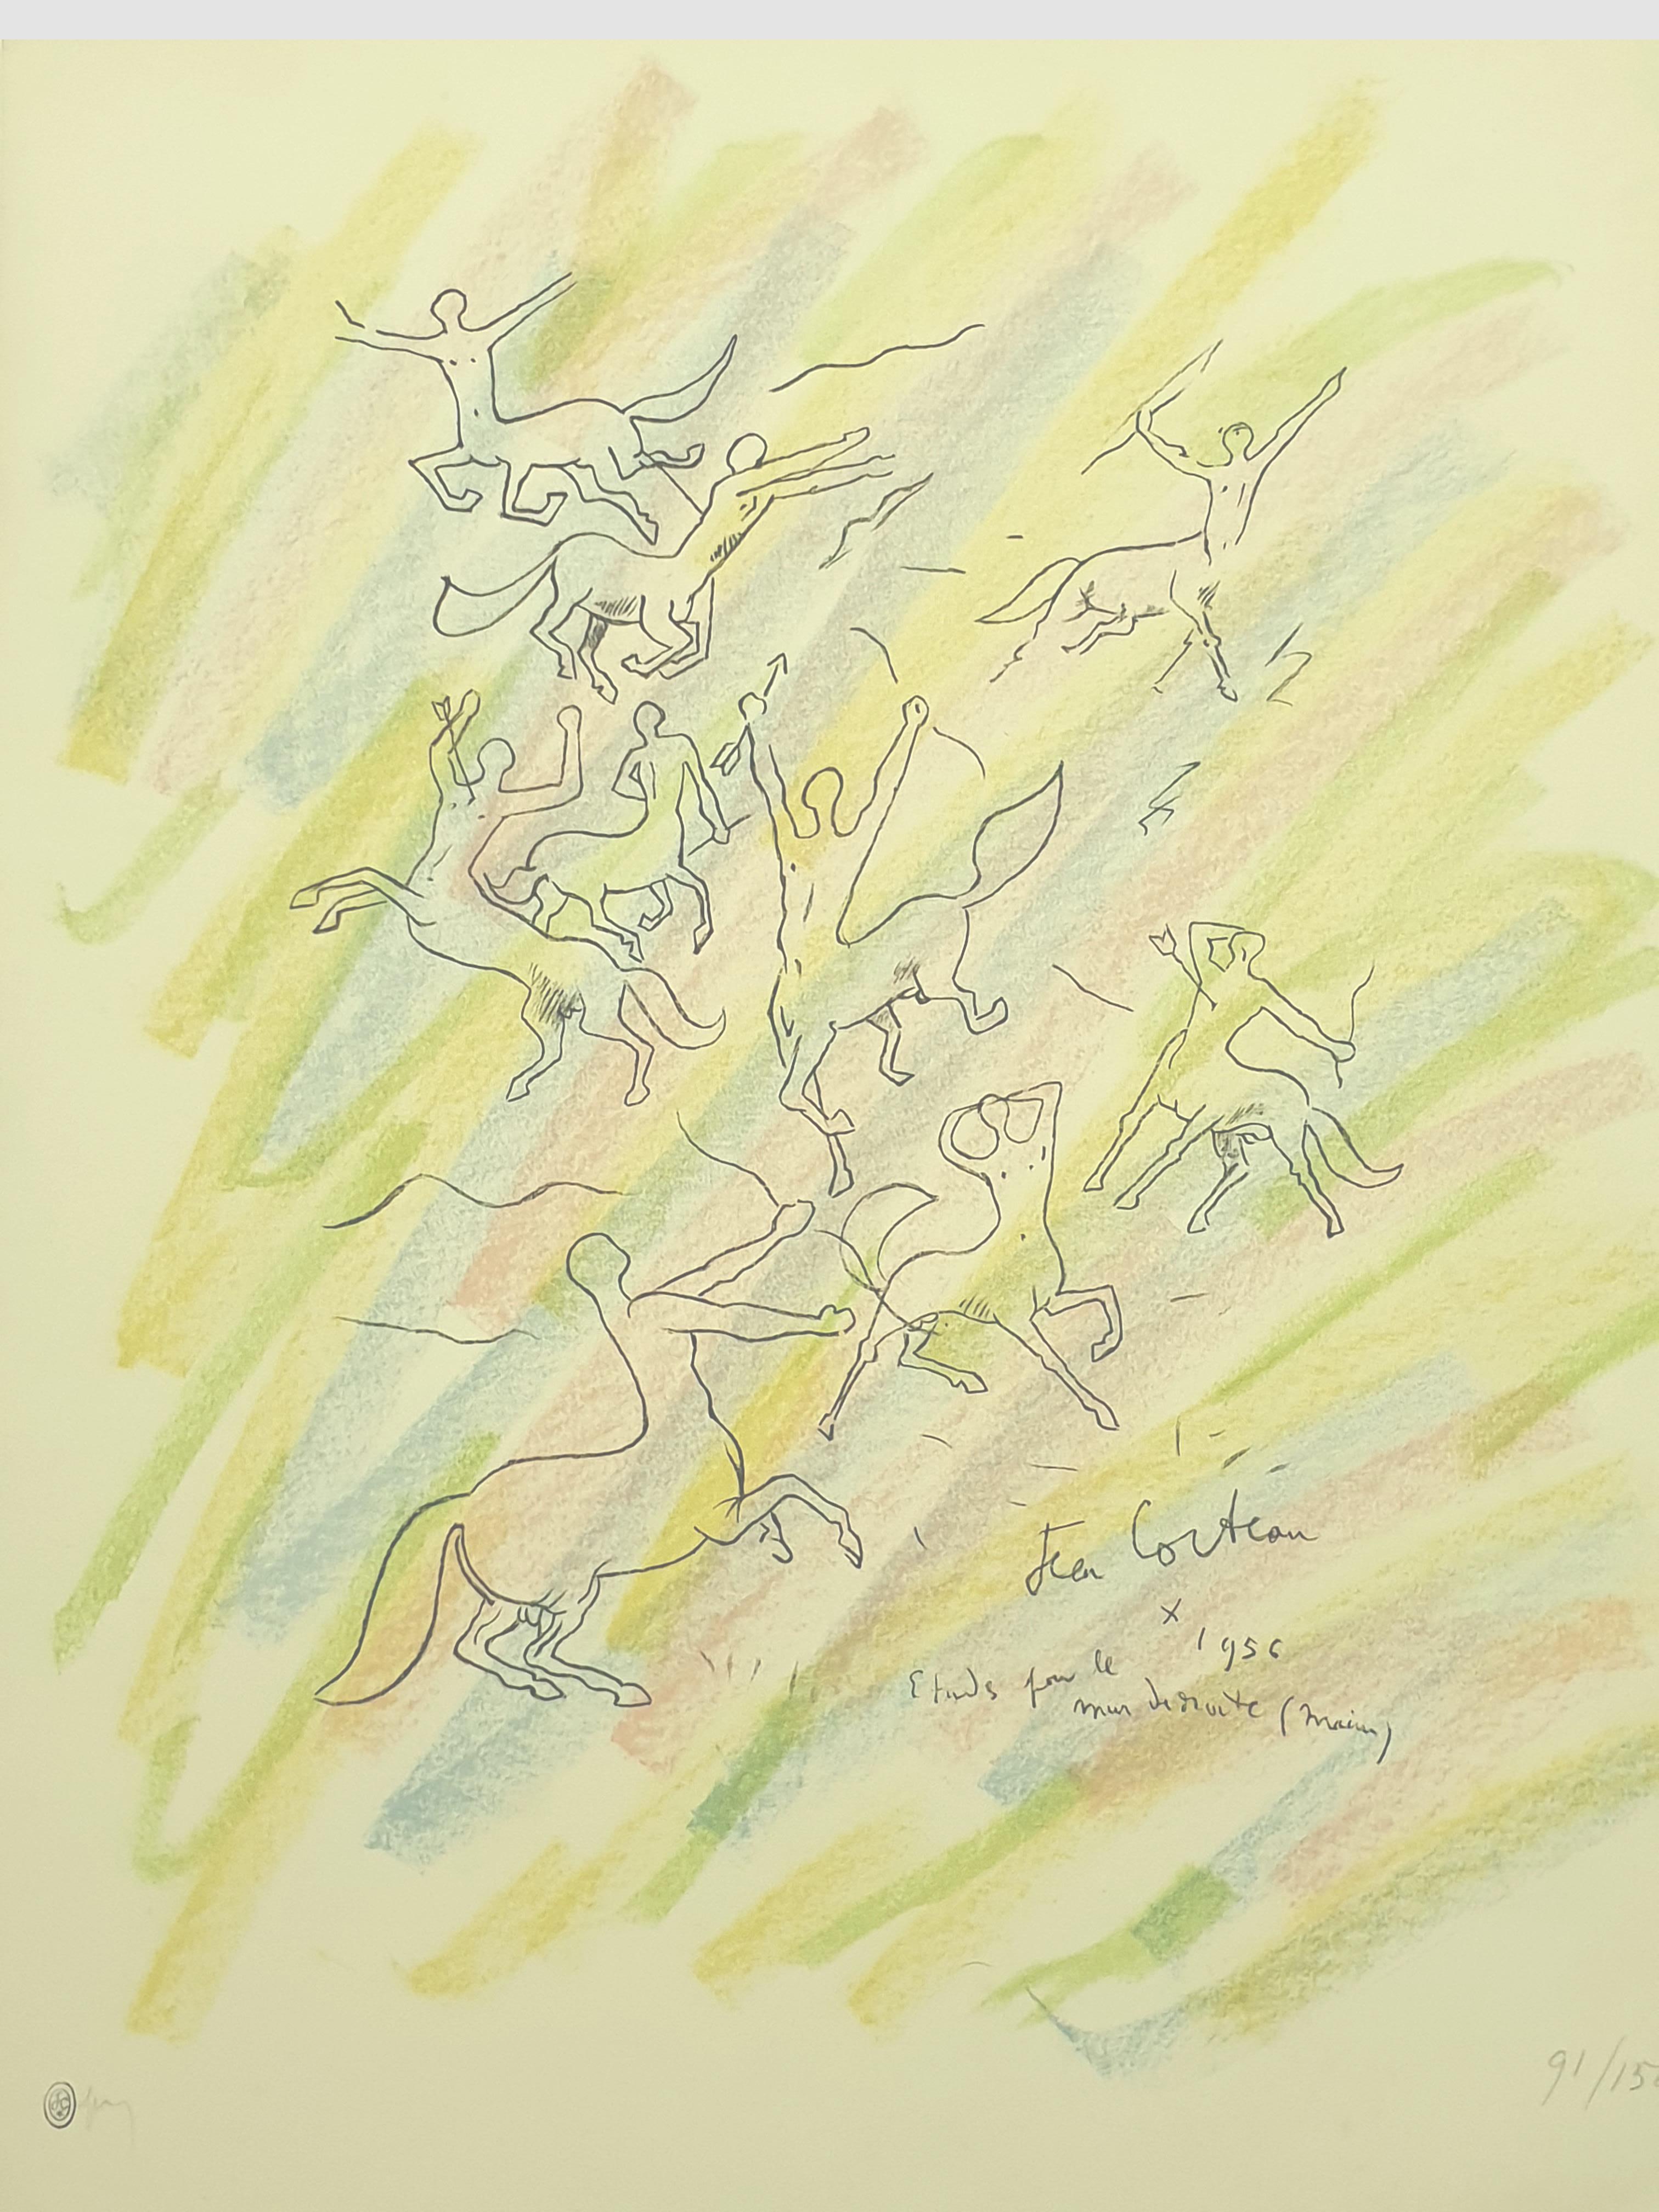 Jean Cocteau - Study for the Wall - Original Handsigned Lithograph
Signed in pencil and numbered
Dimensions: 65 x 50 cm
Edition: 150
1956